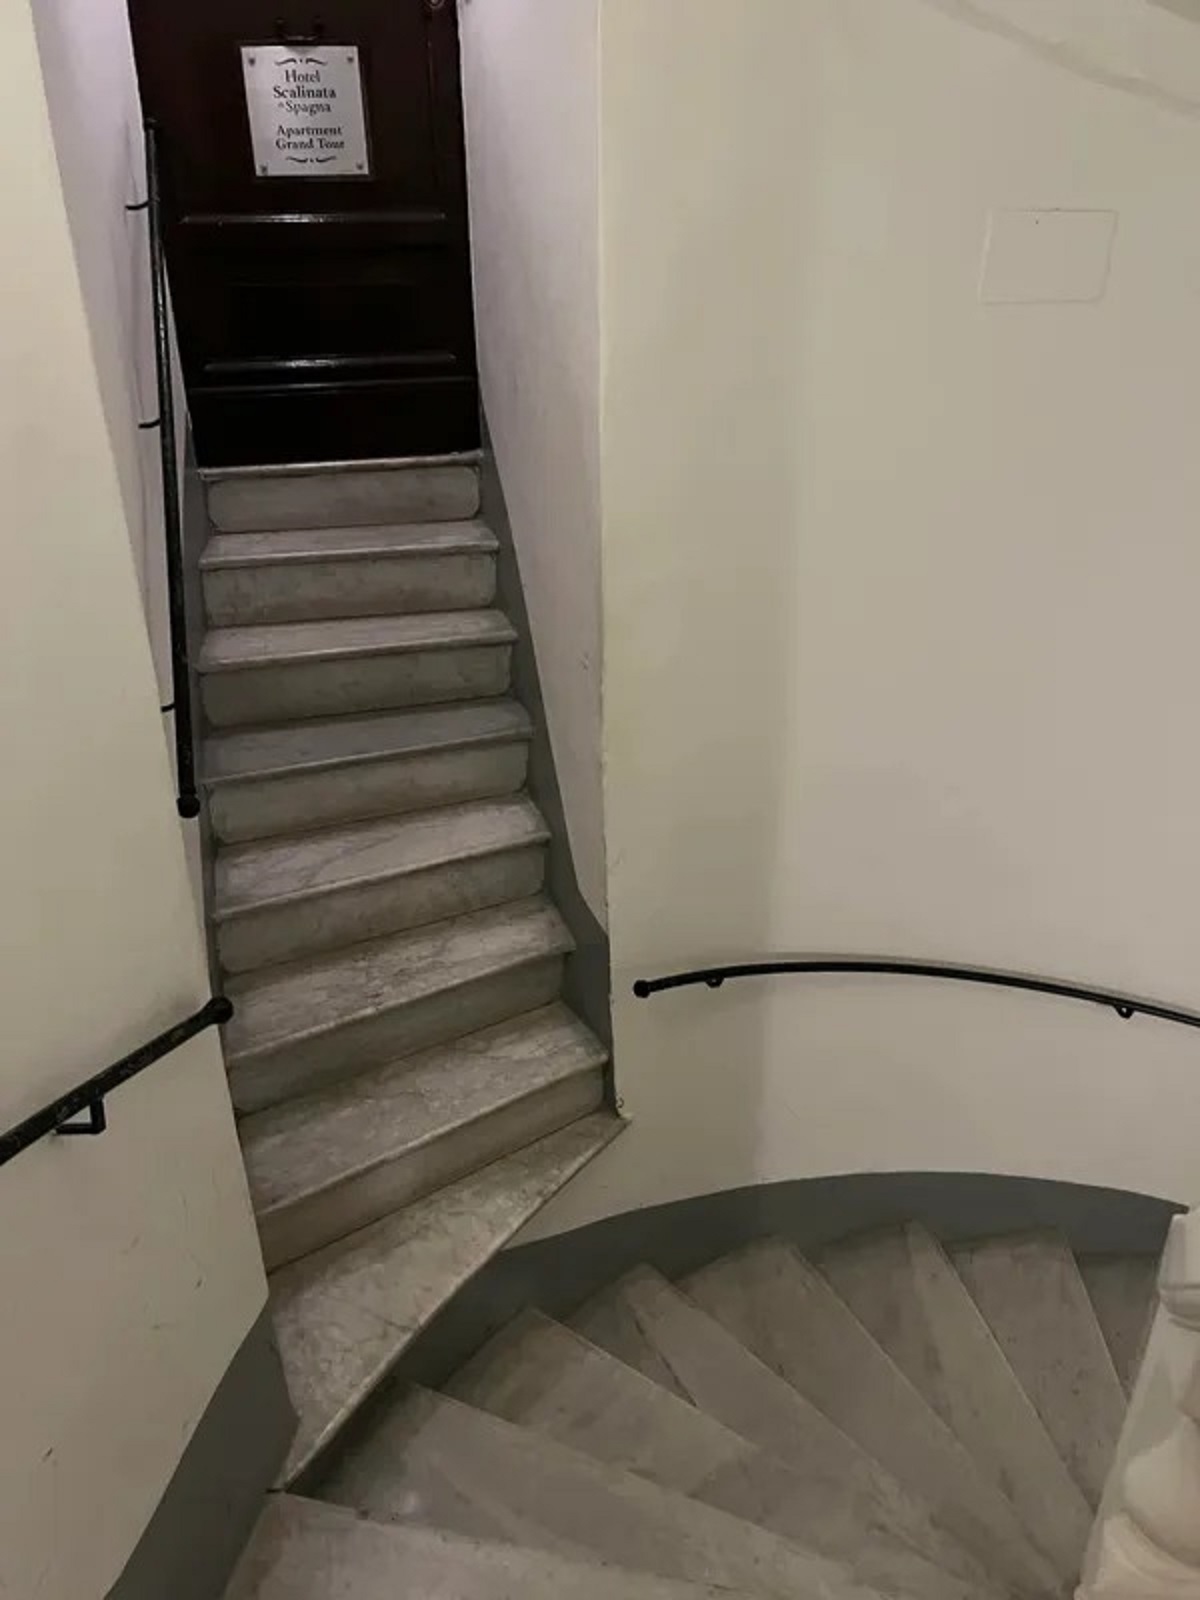 The staircase at my hotel room just drops off.